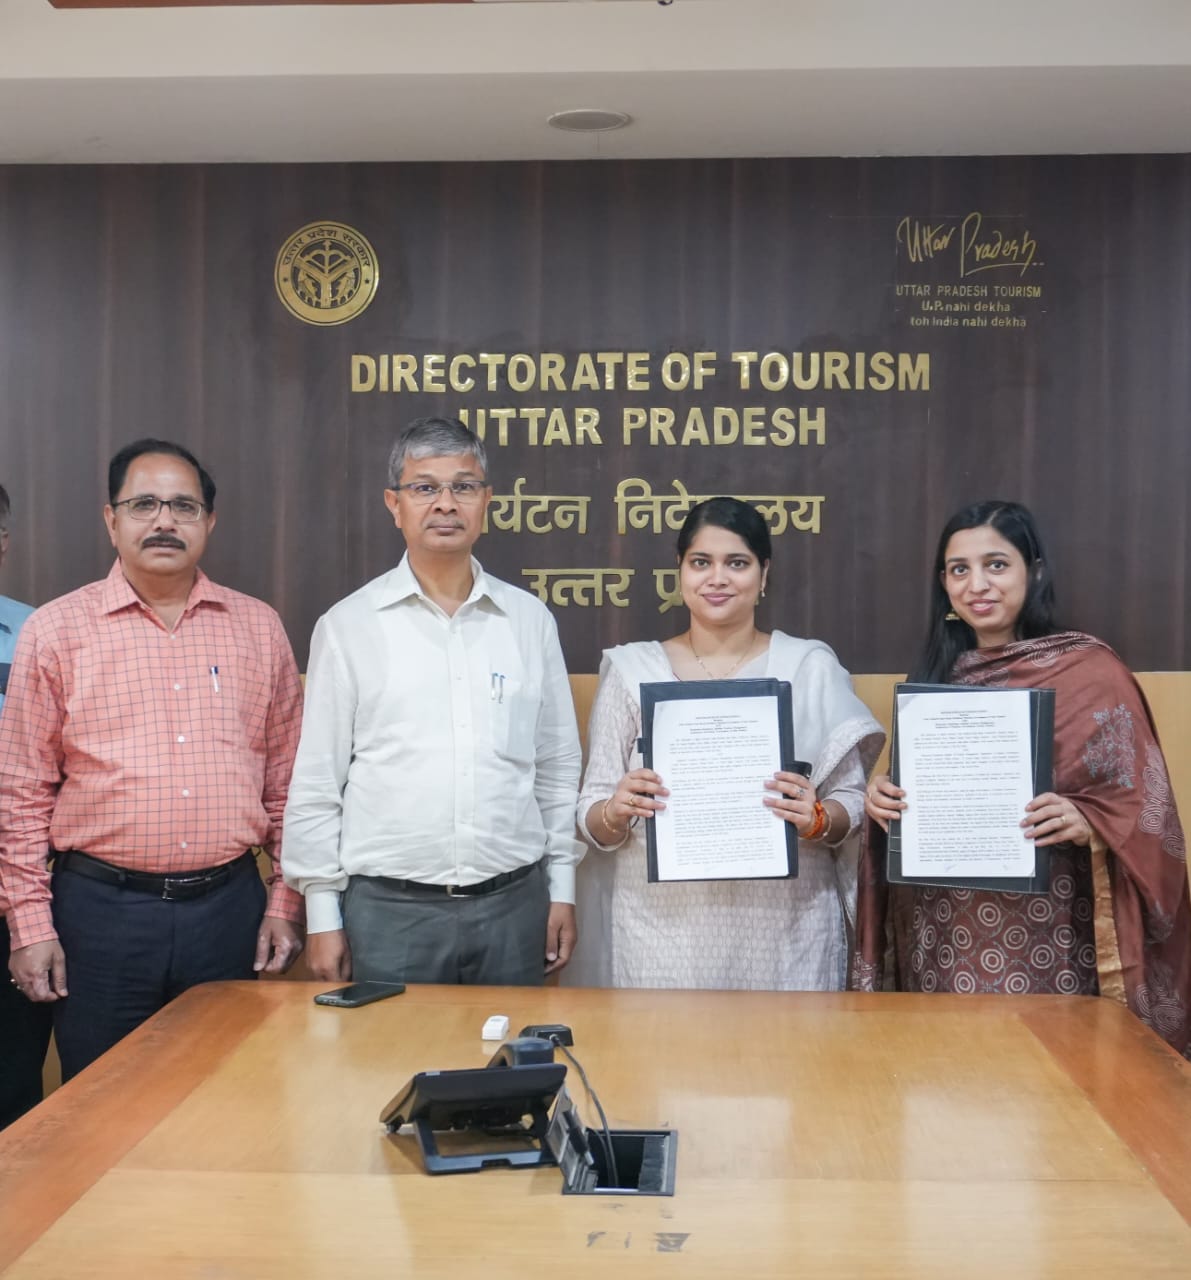 UP Tourism signs 2 MoUs to boost rural tourism; identifies 229 villages for development